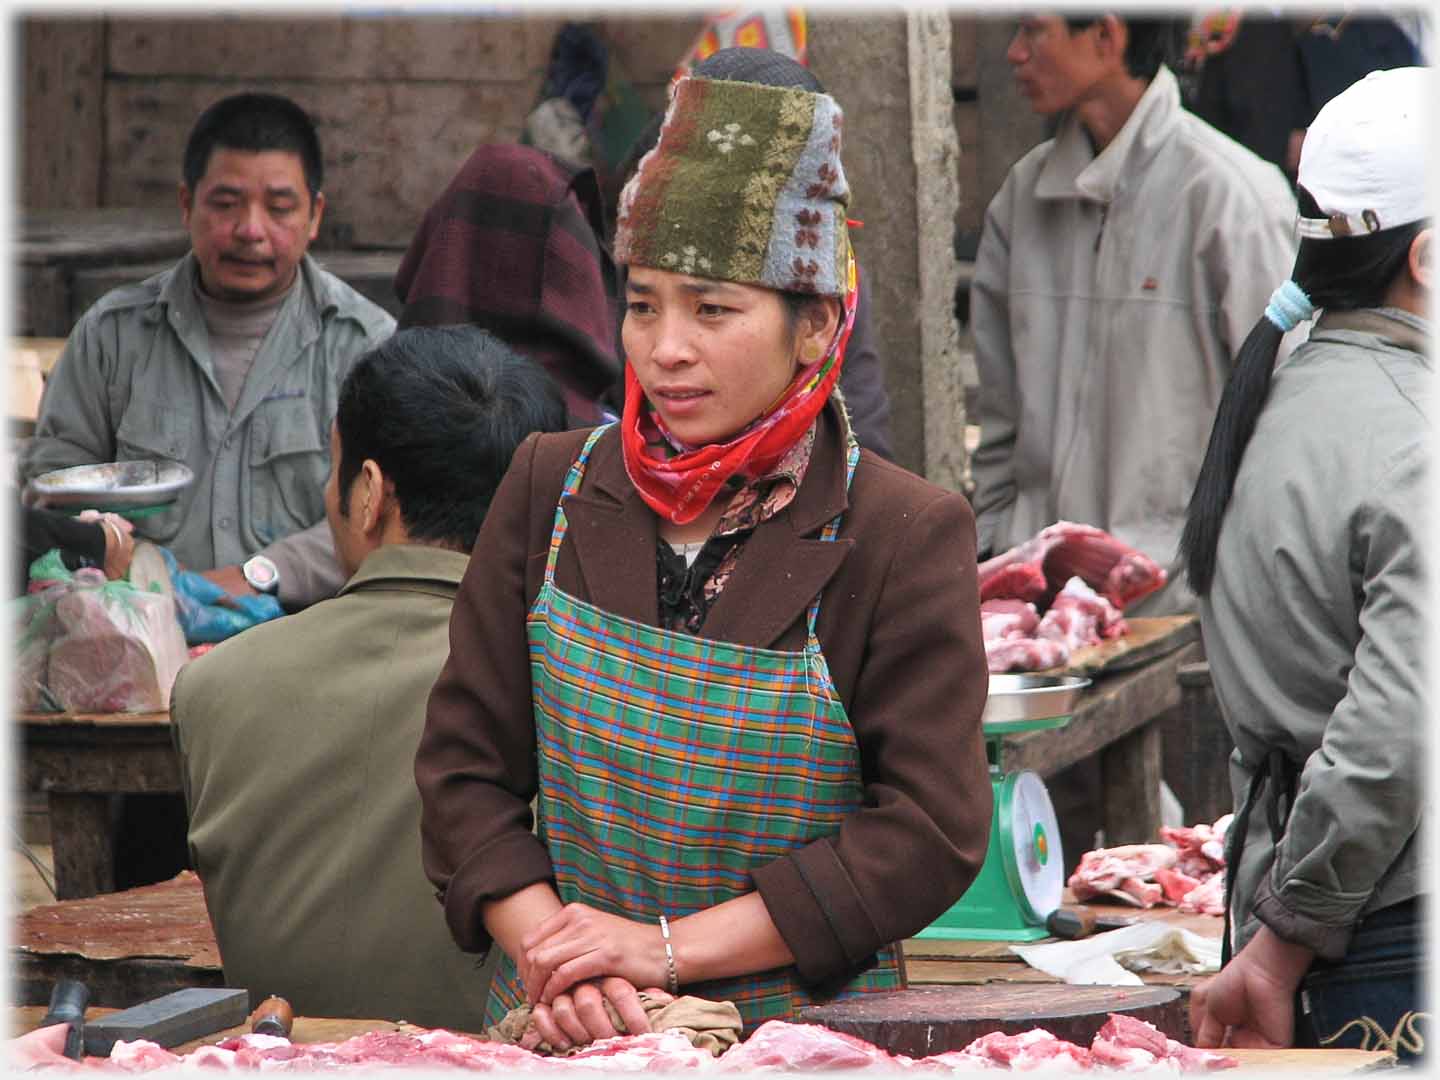 Younger woman standing at meat stall in apron and open topped hat.